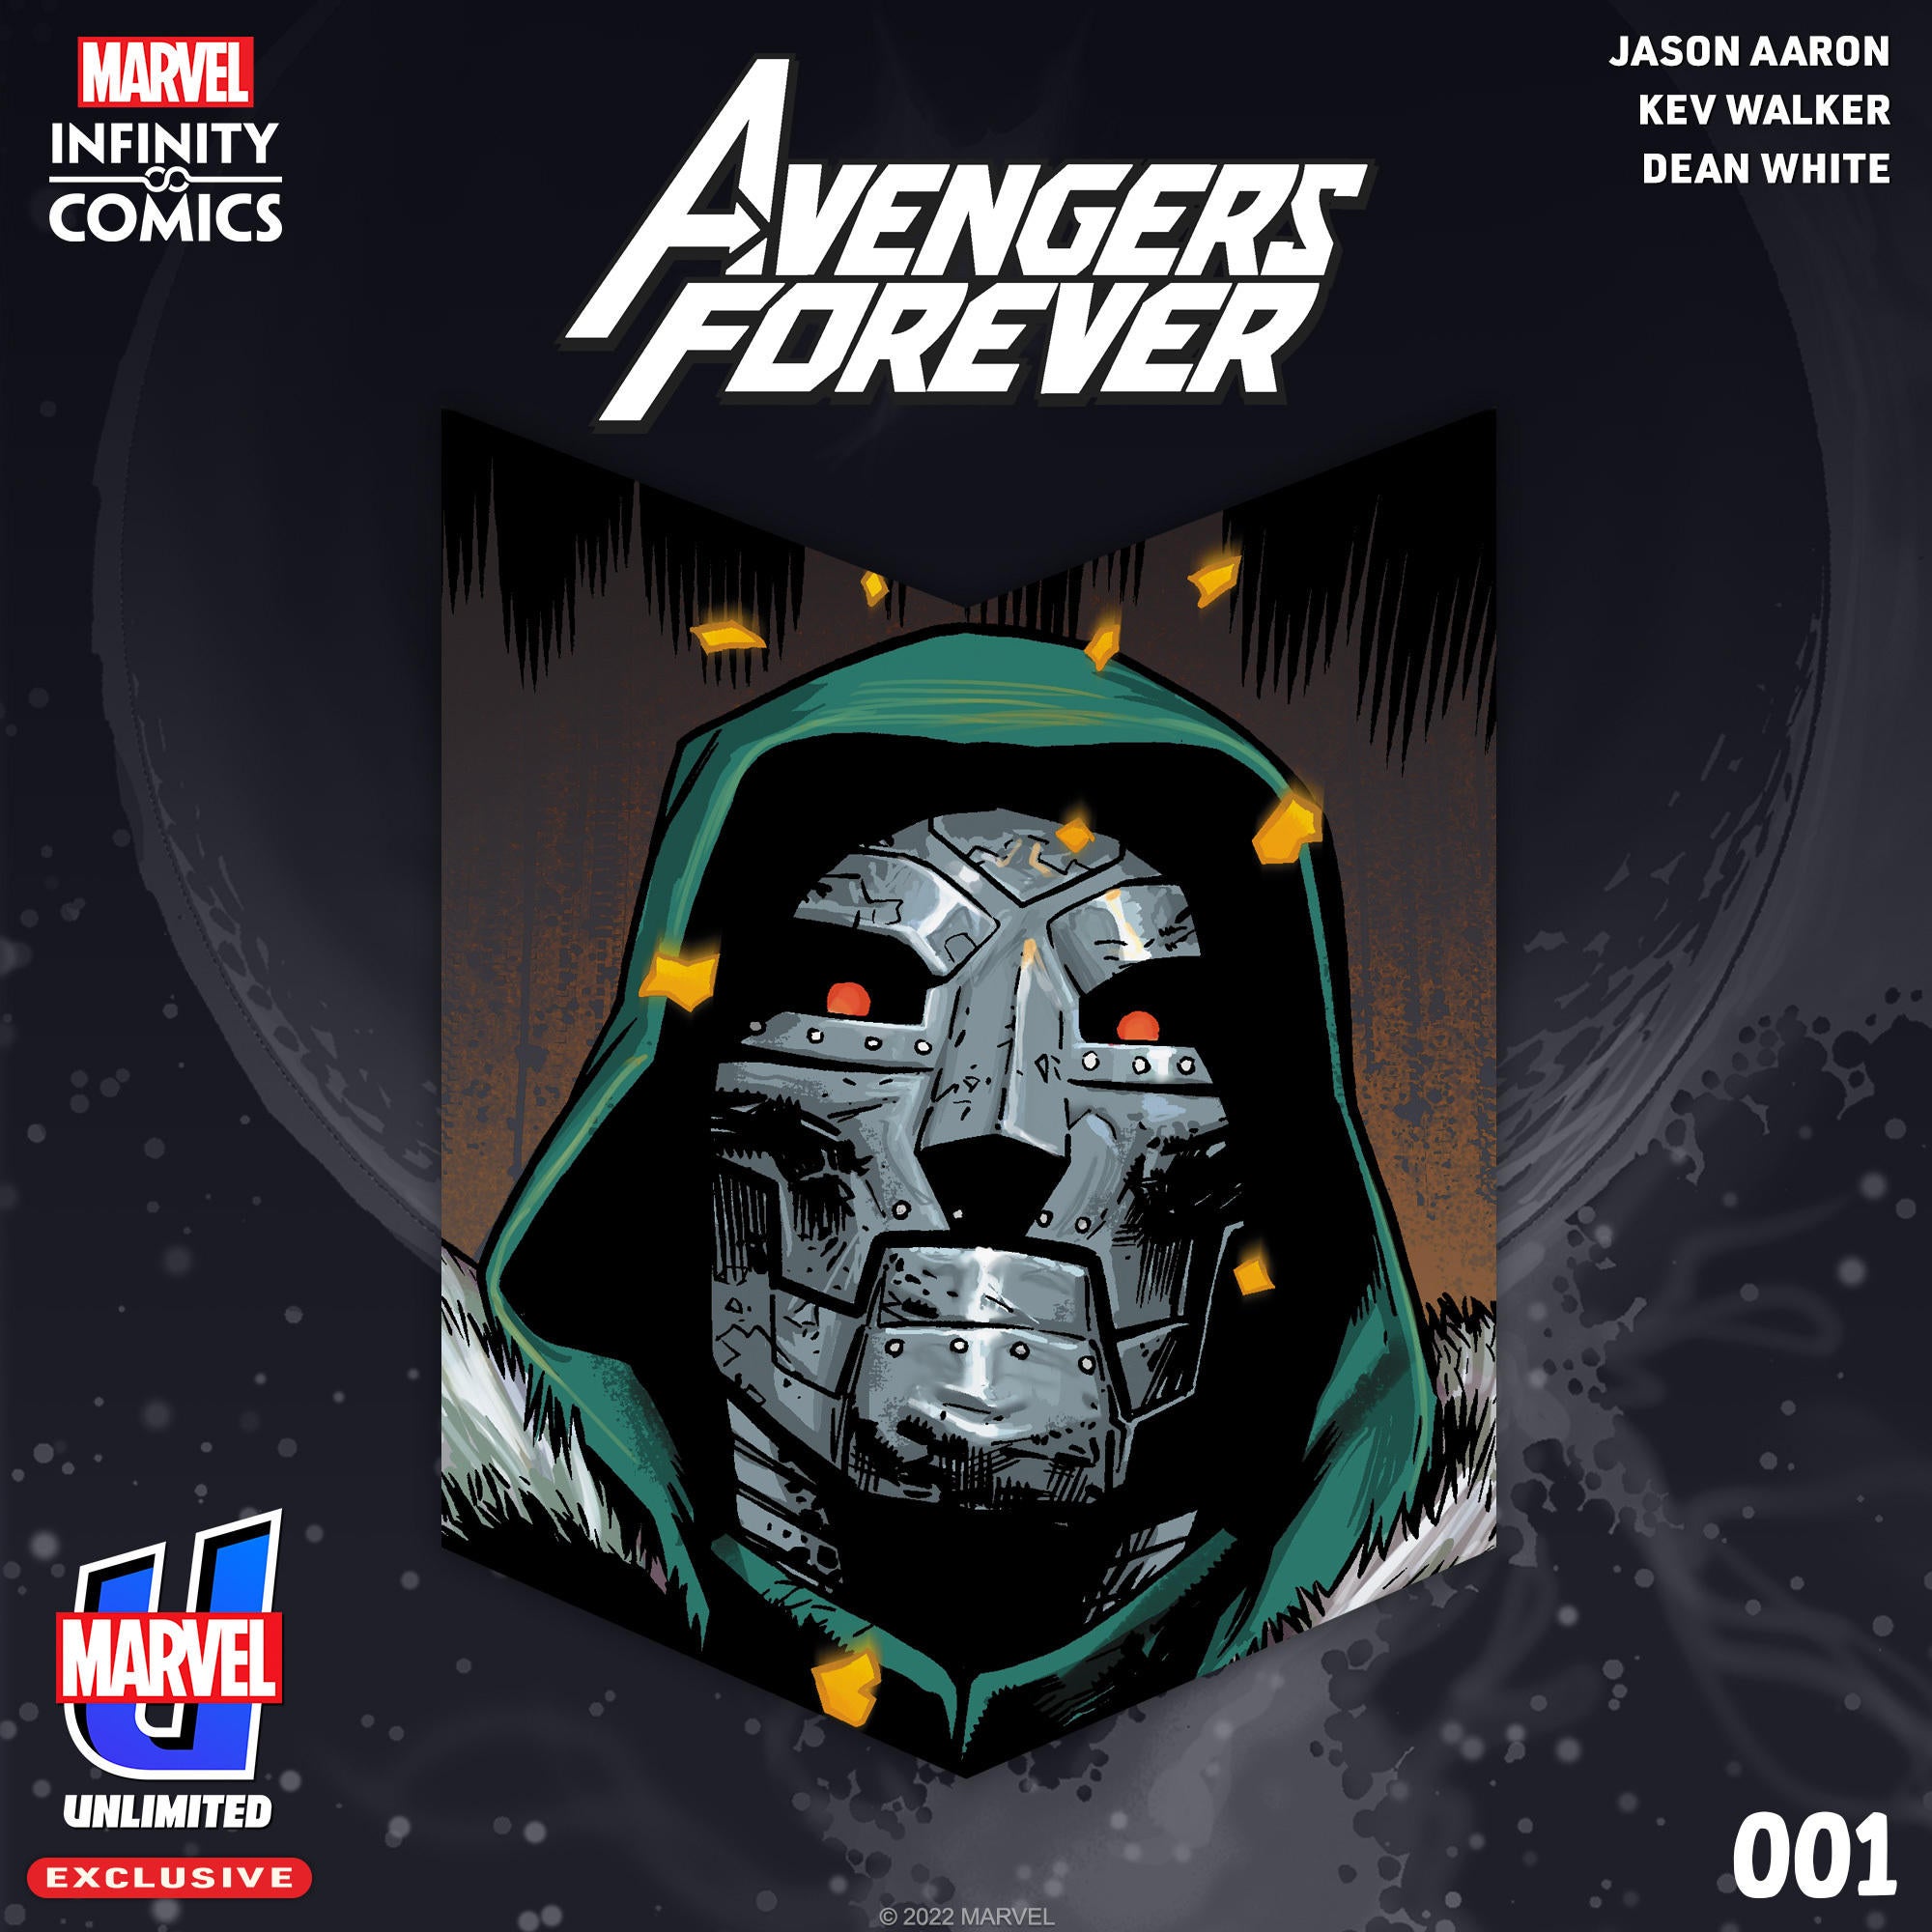 Avengers Forever Gets A Digital Spinoff Series On Marvel Unlimited 2929